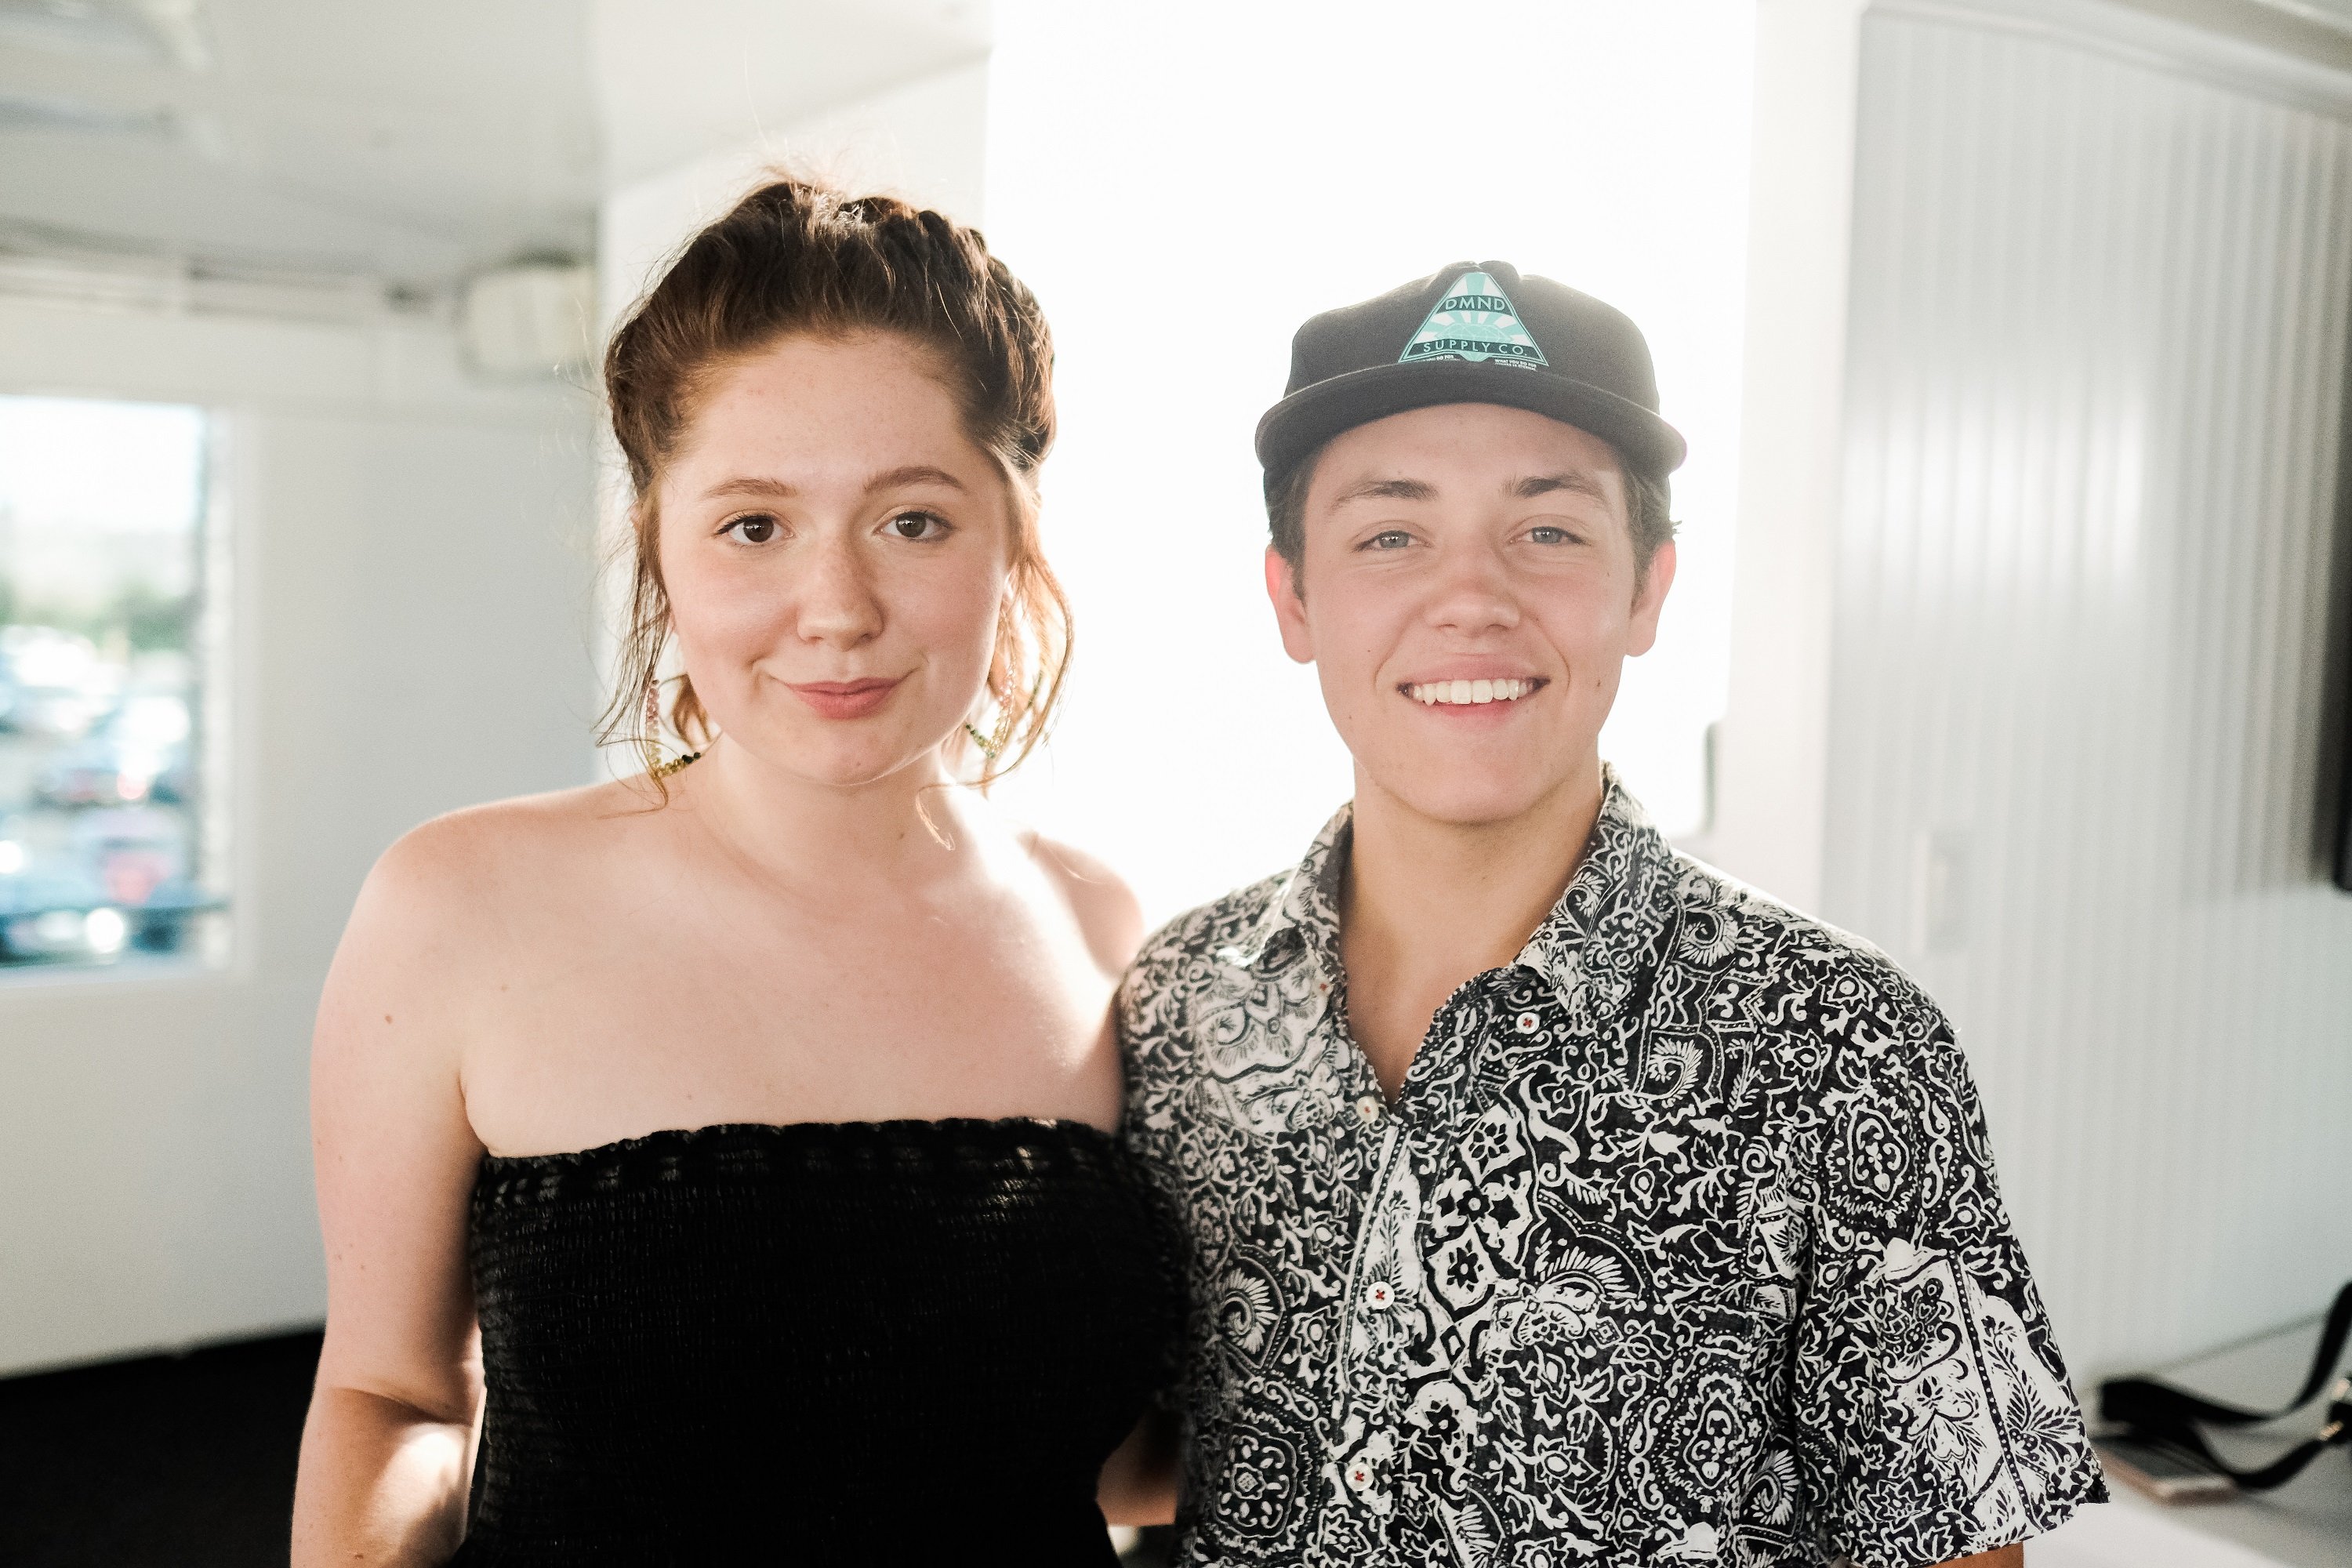 'Shameless' Actors Emma Rose Kenney and Ethan Cutkosky as Debbie and Carl Gallagher